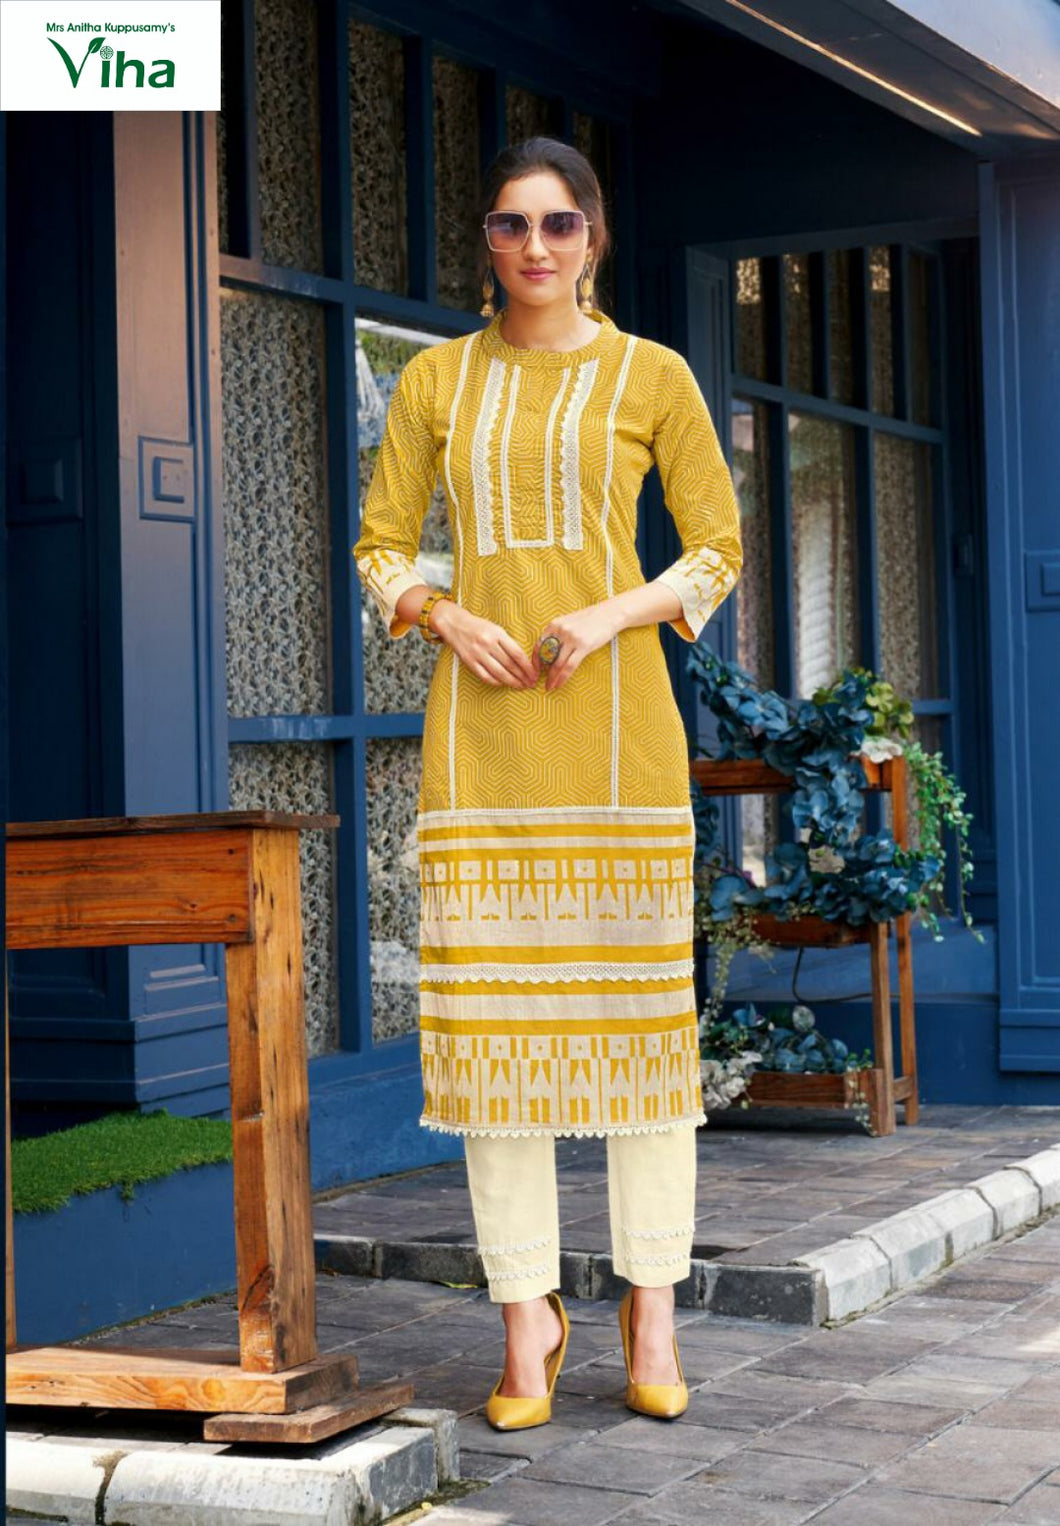 Kurta Set and Kurti Set for Women - What is the Difference? by  StadofashionStore - Issuu